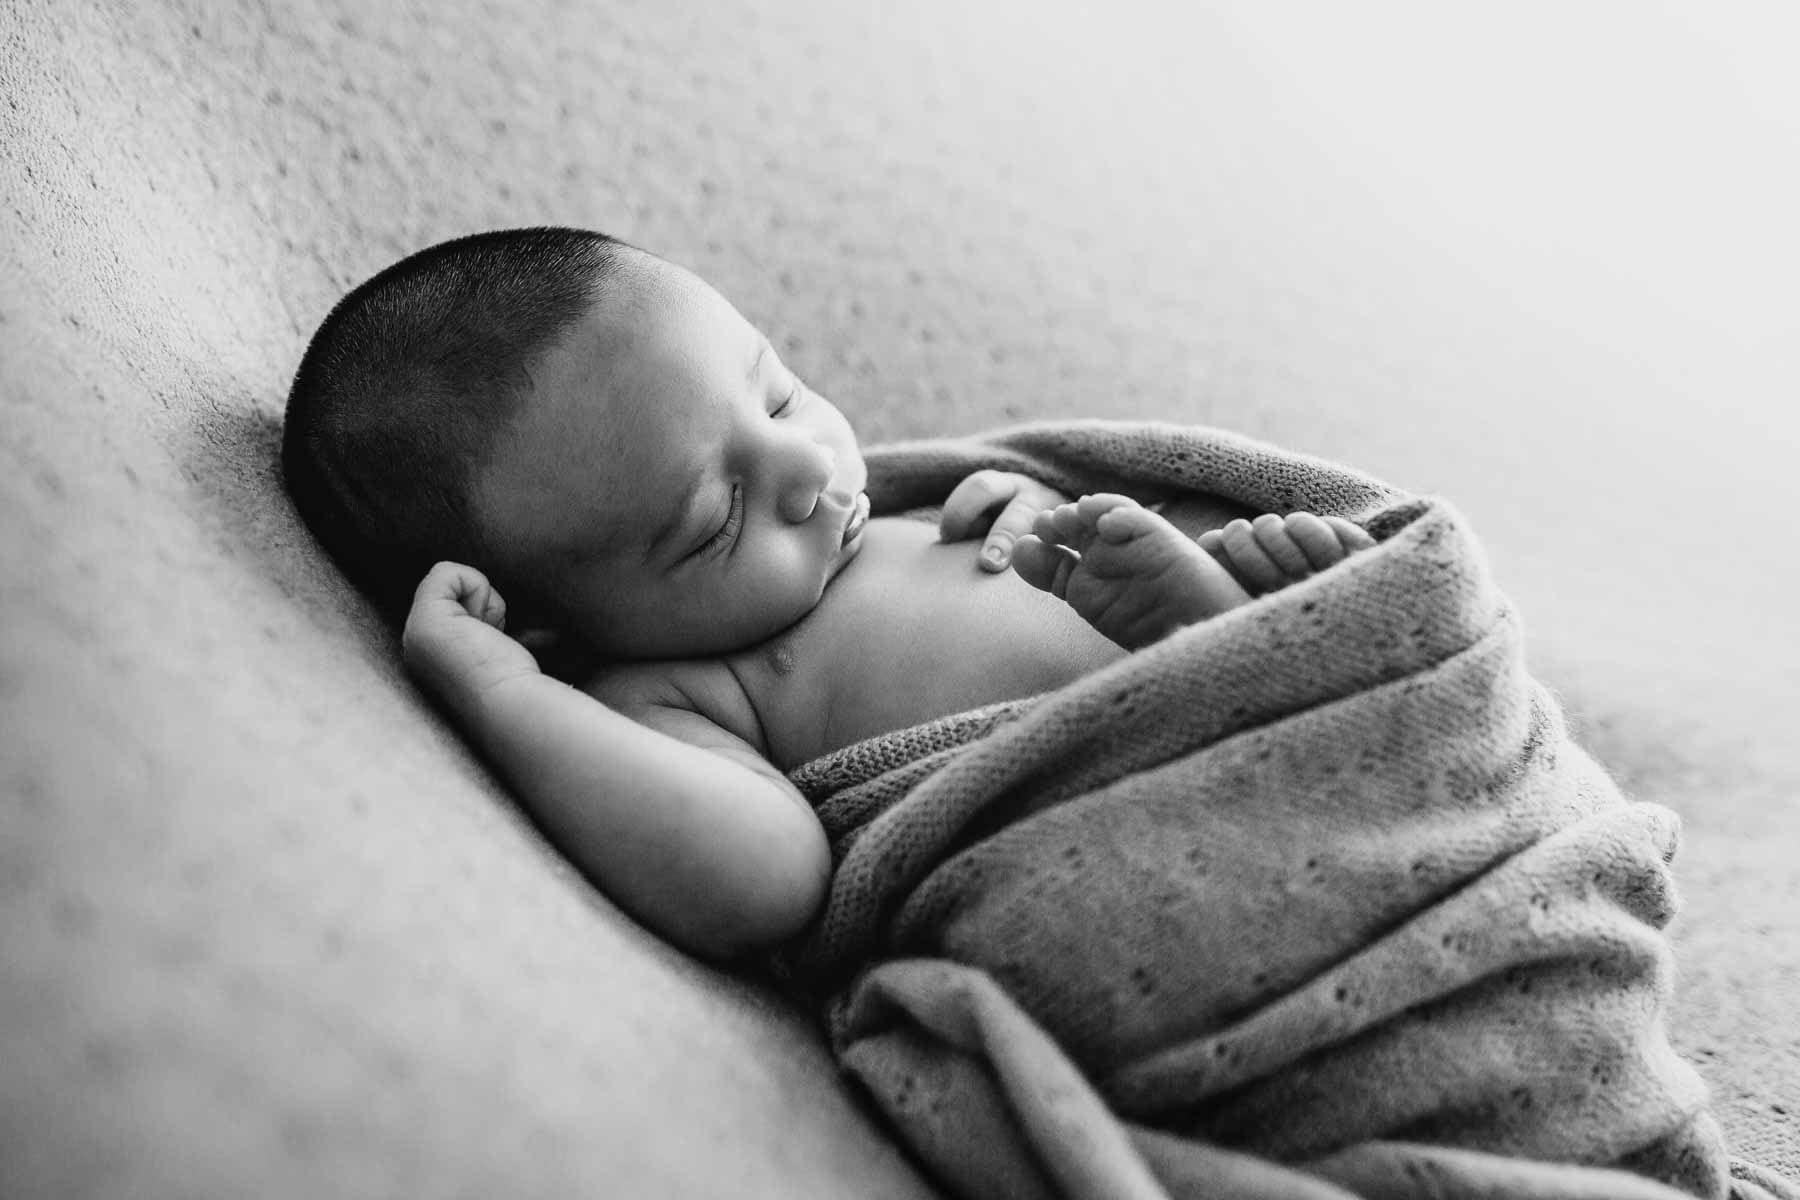 Image of sleeping newborn baby details, little fingers and toes